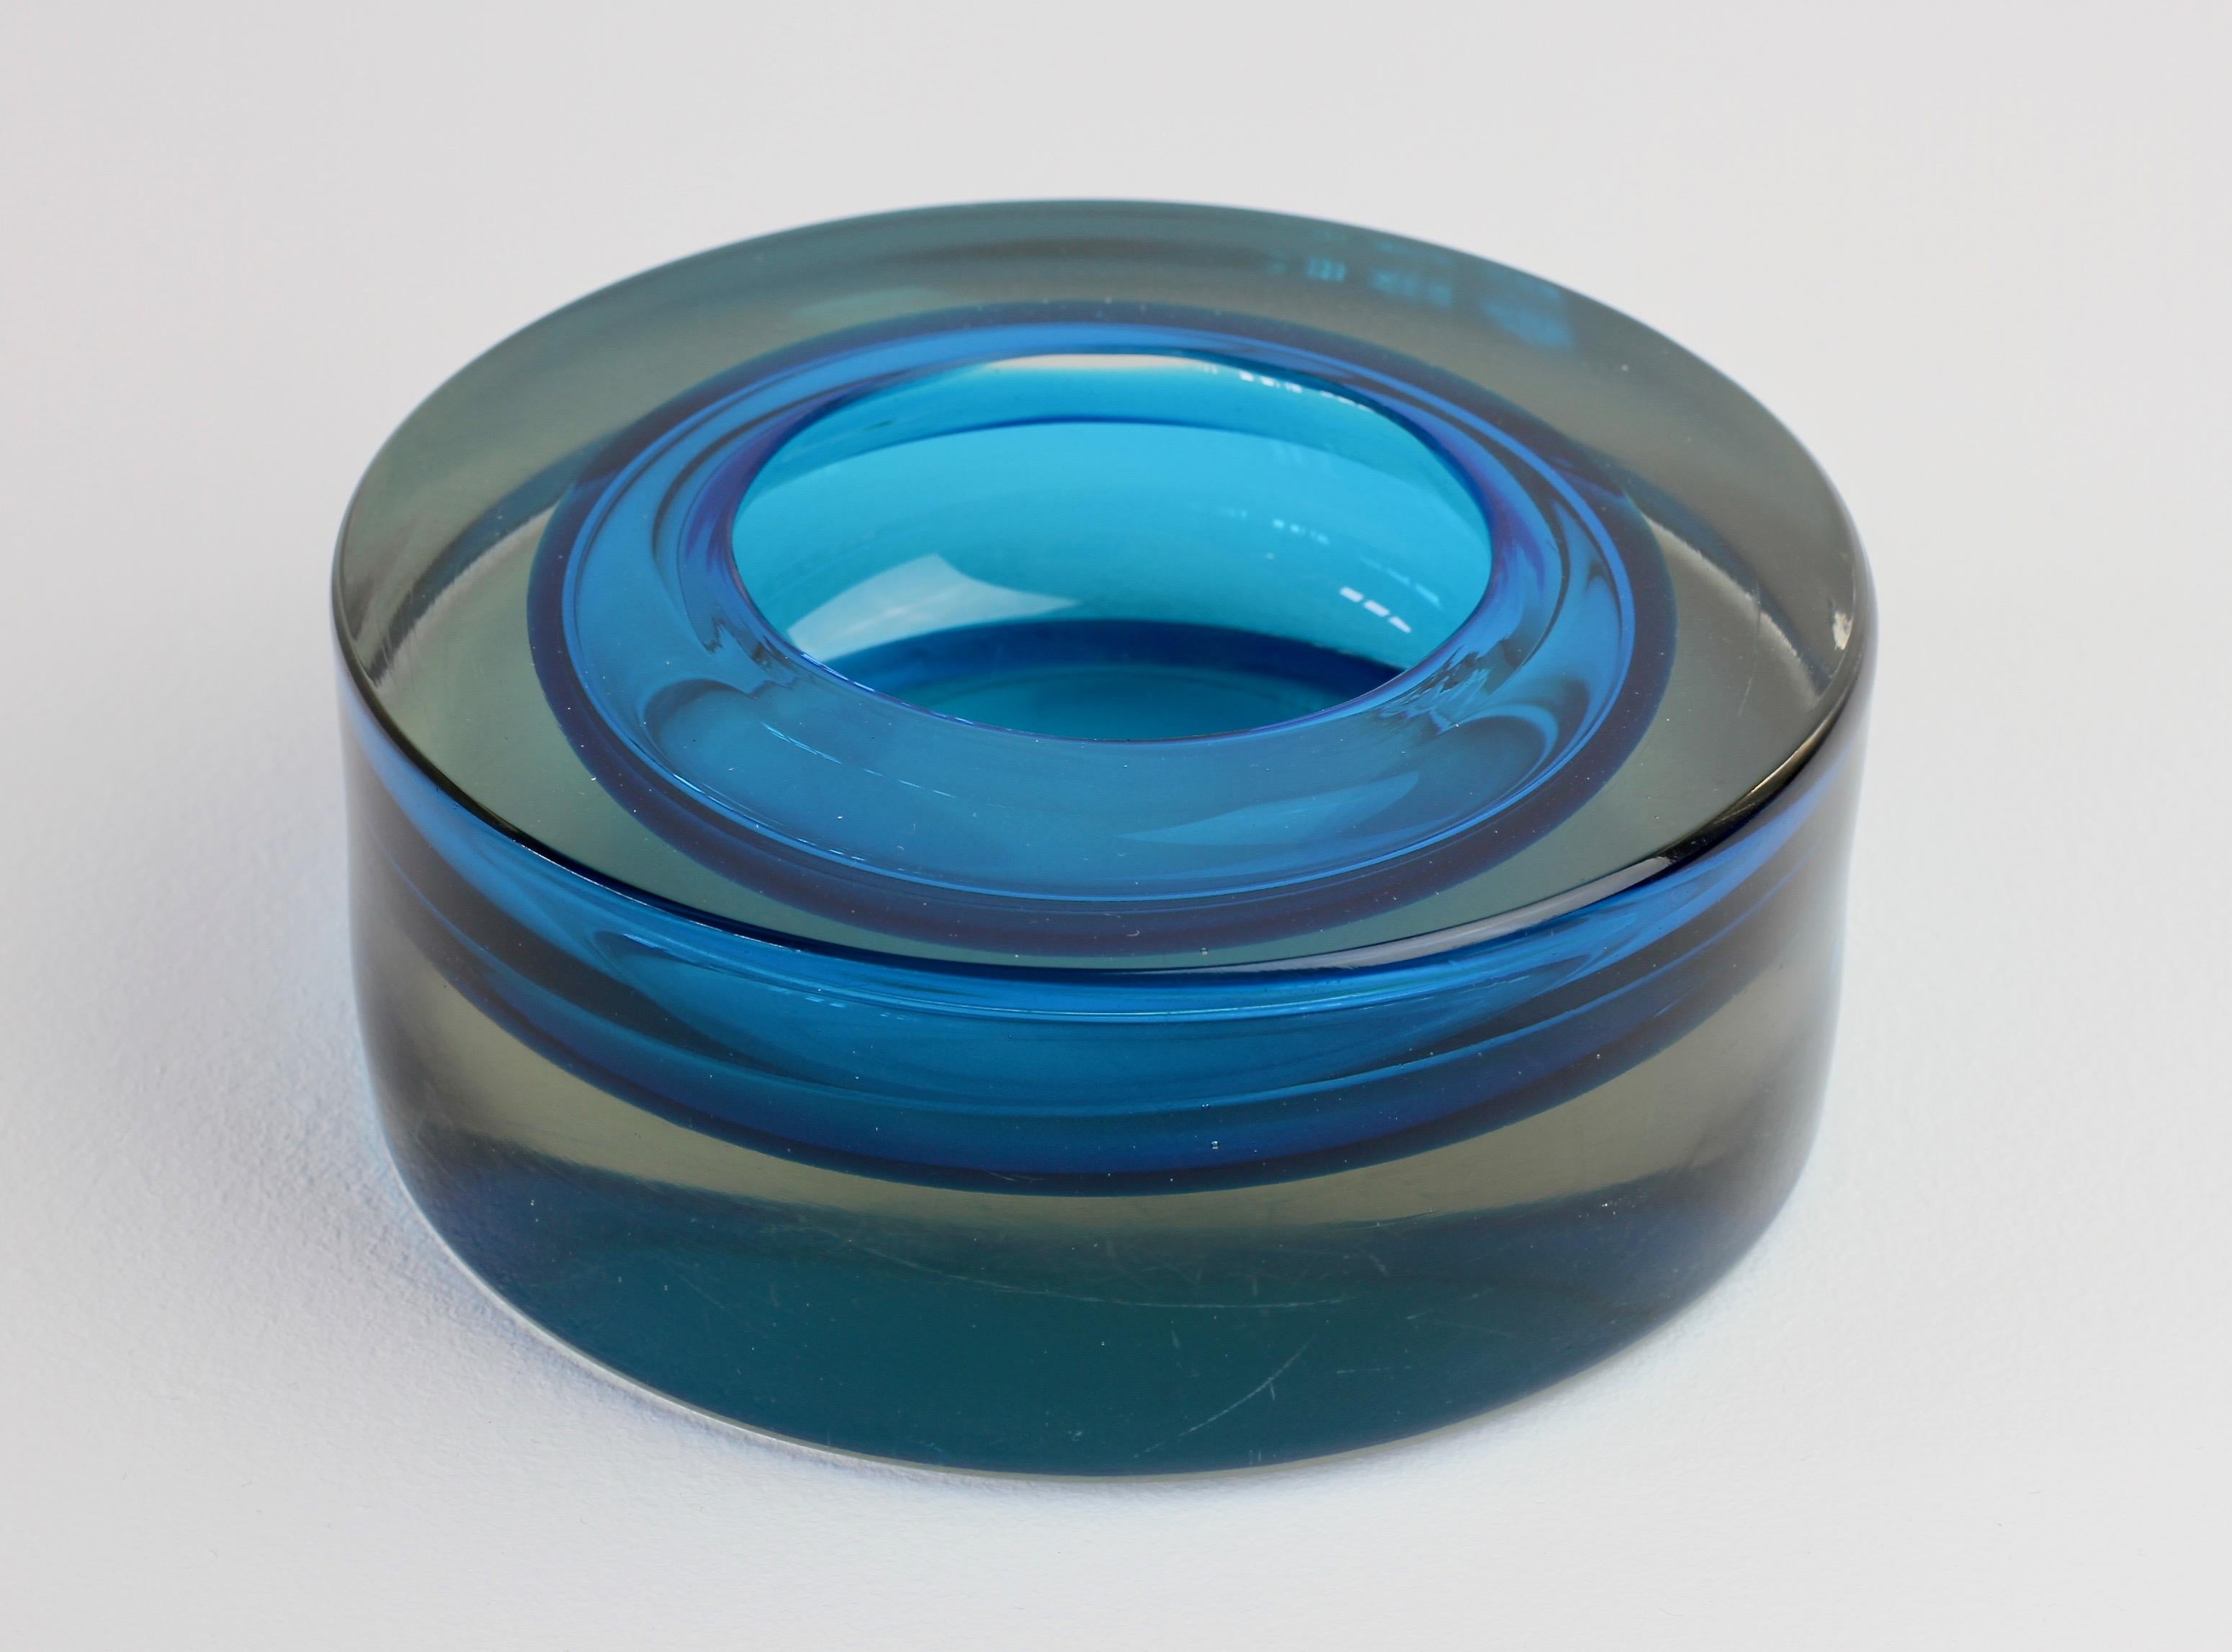 Blown Glass Large Italian Murano Gray Blue Sommerso Glass Bowl, Serving Dish or Ashtray